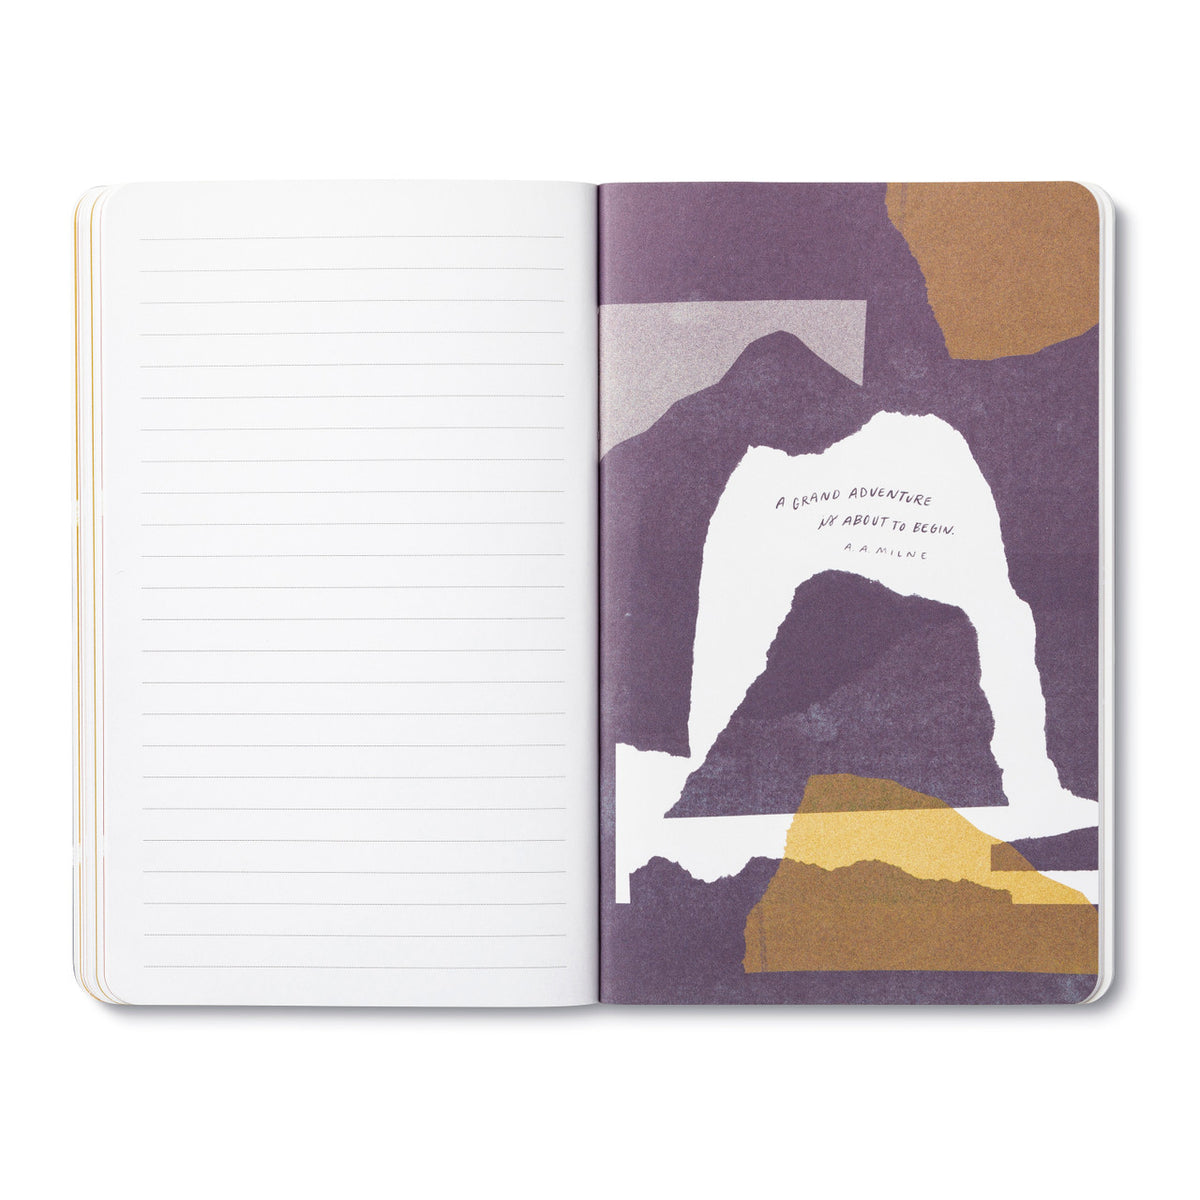 &quot;Your Heart Knows The Way. Run In That Direction&quot;  — Rumi Write Now Softcover Journal